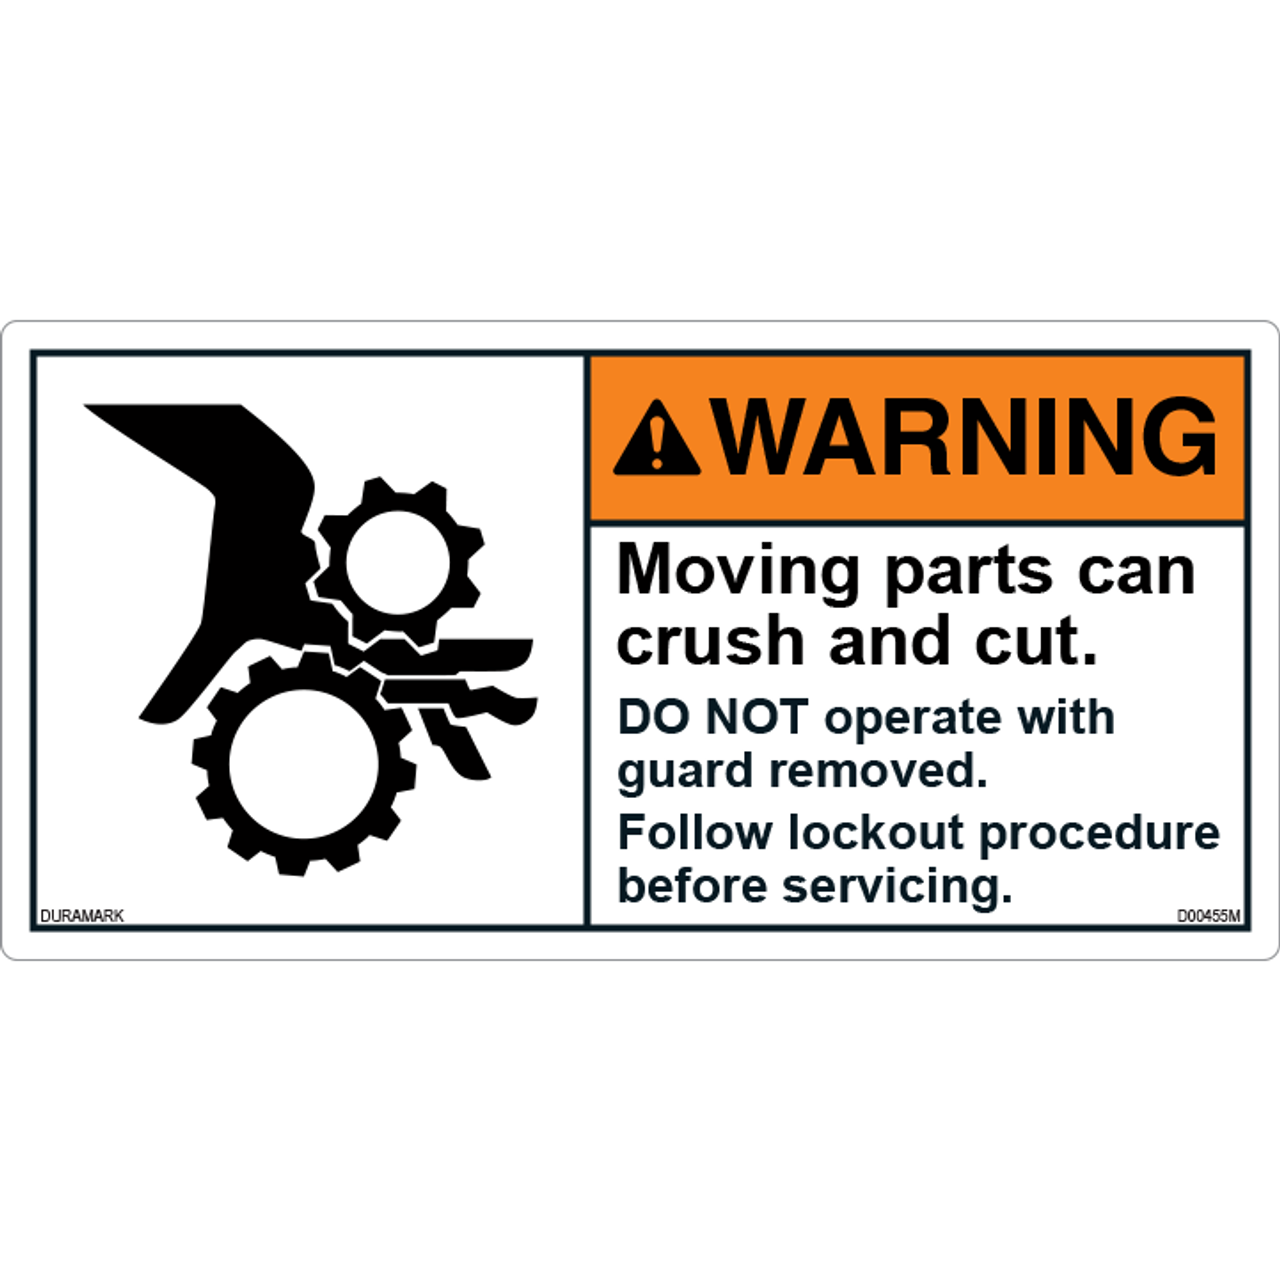 ANSI Safety Label - Warning - Gears - Crush And Cut